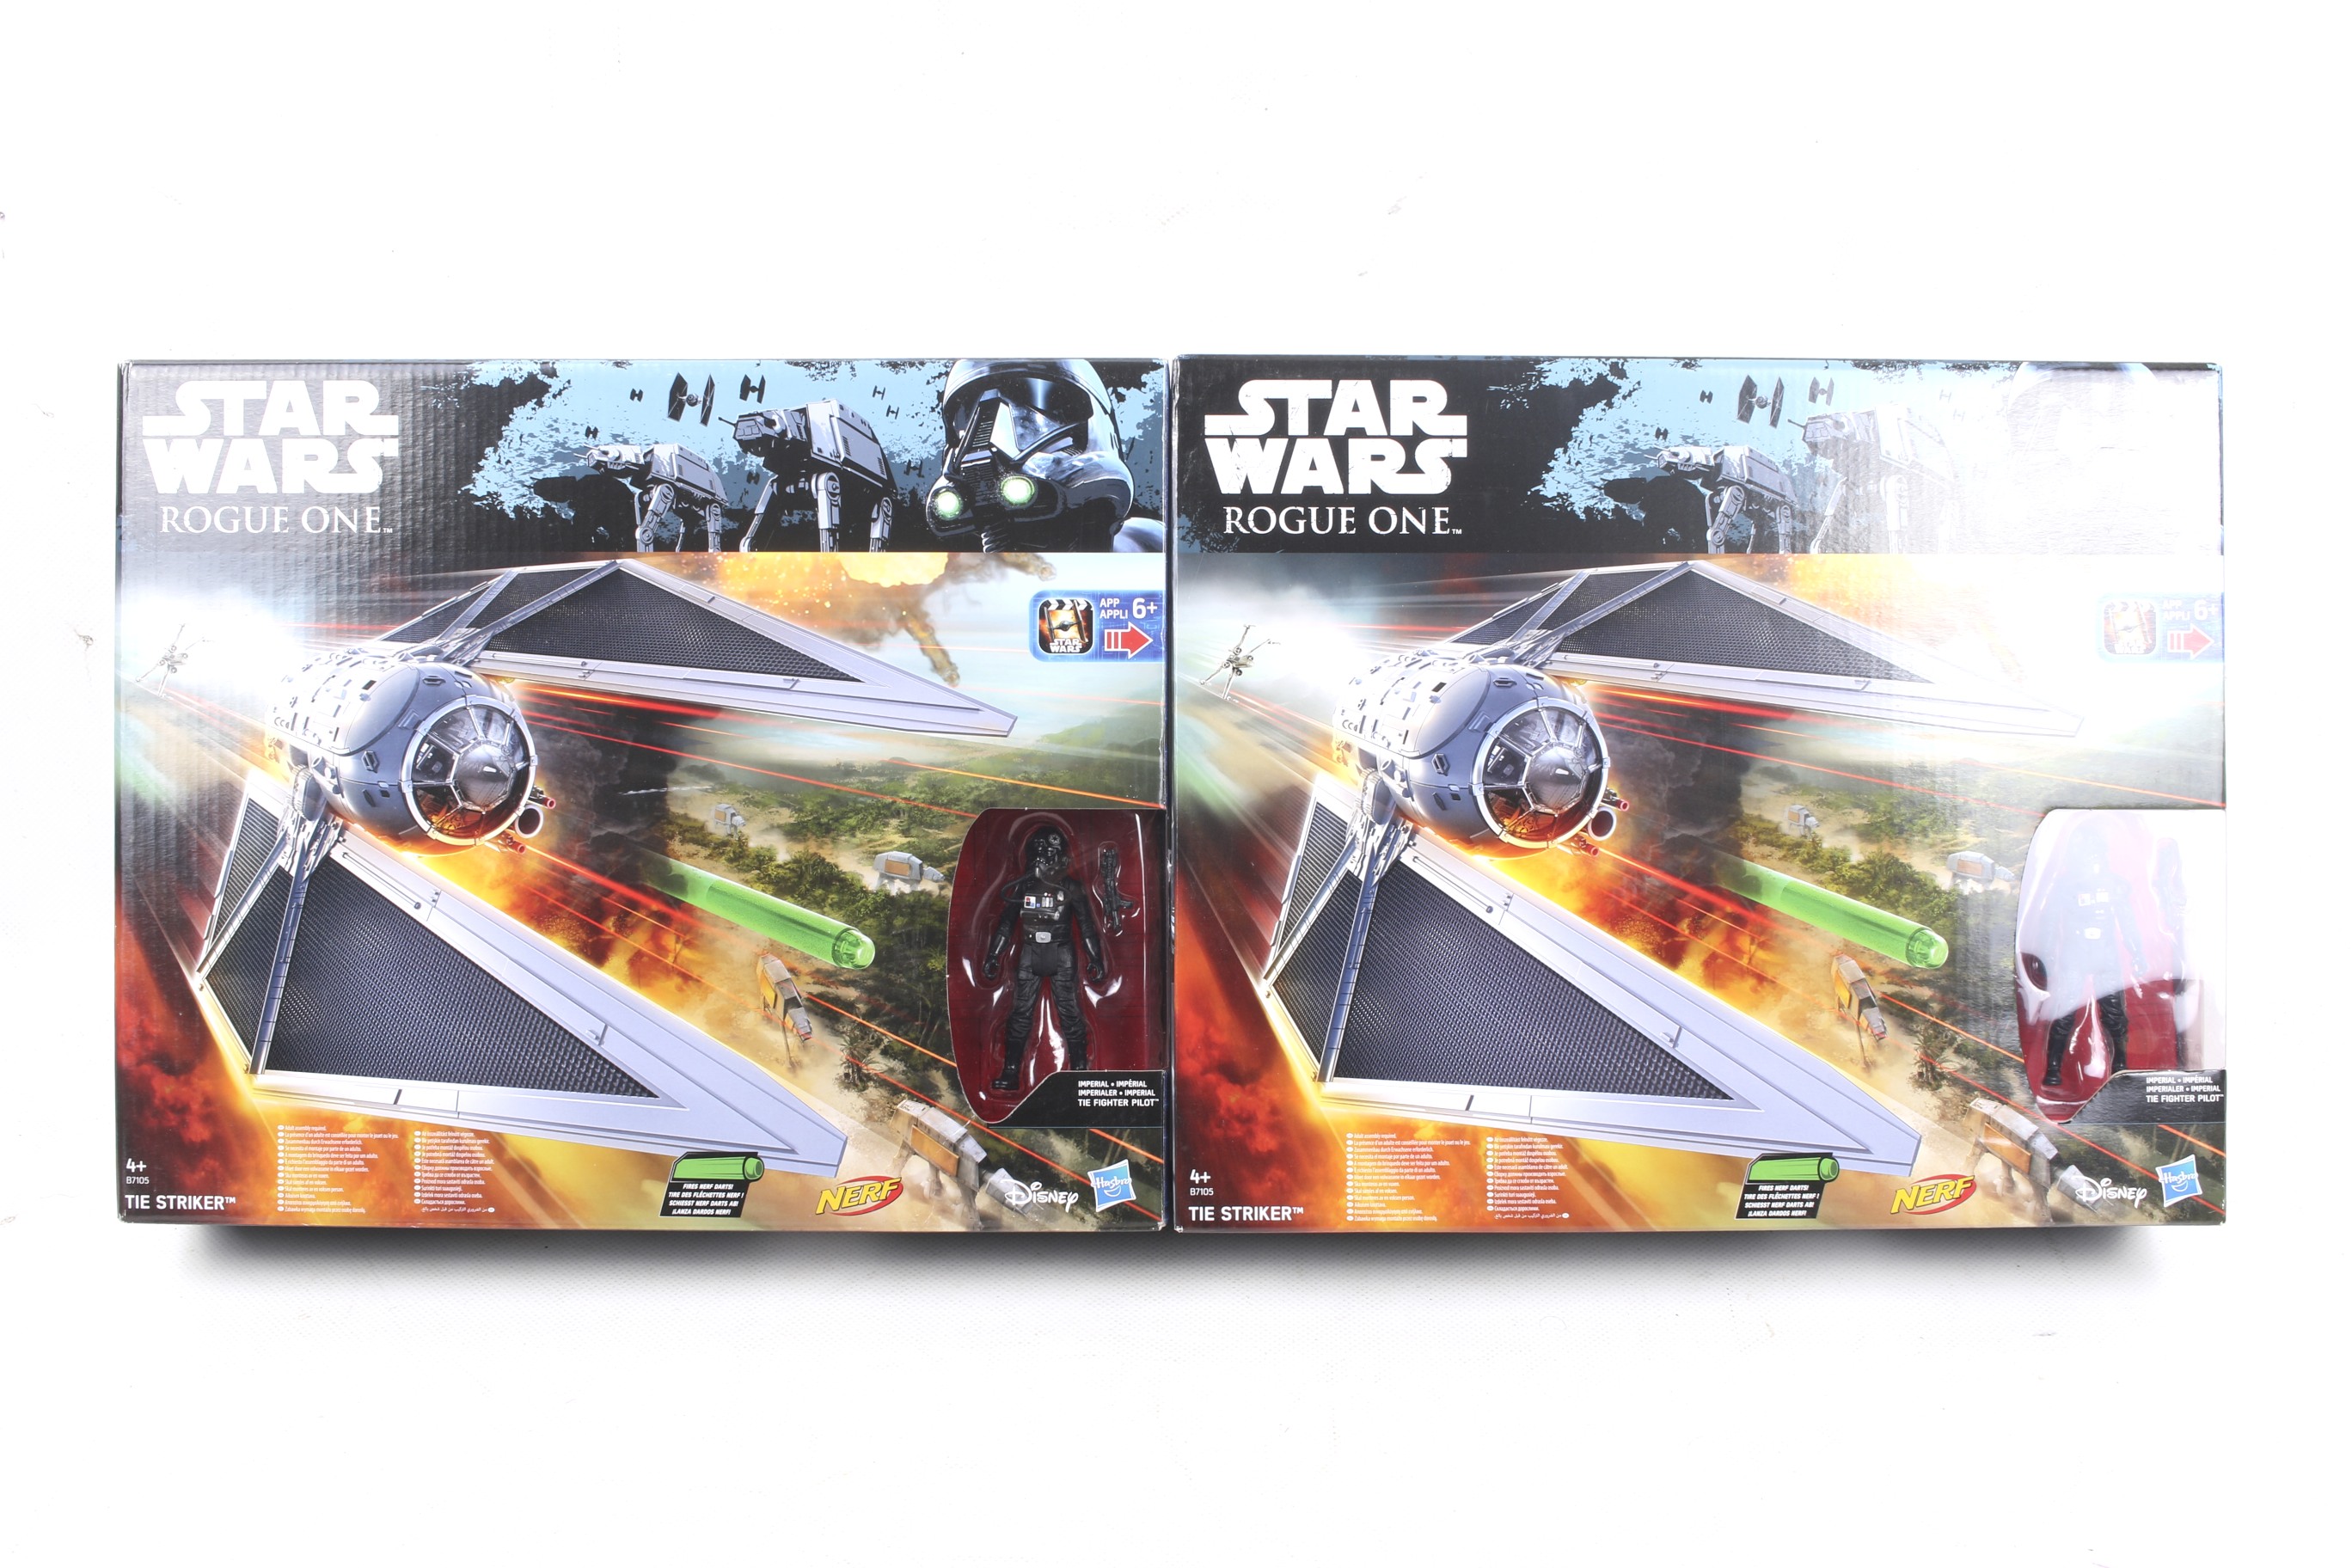 Two Star Wars Rogue One Tie Striker sets. Including action fgure and accessories, in original boxes.